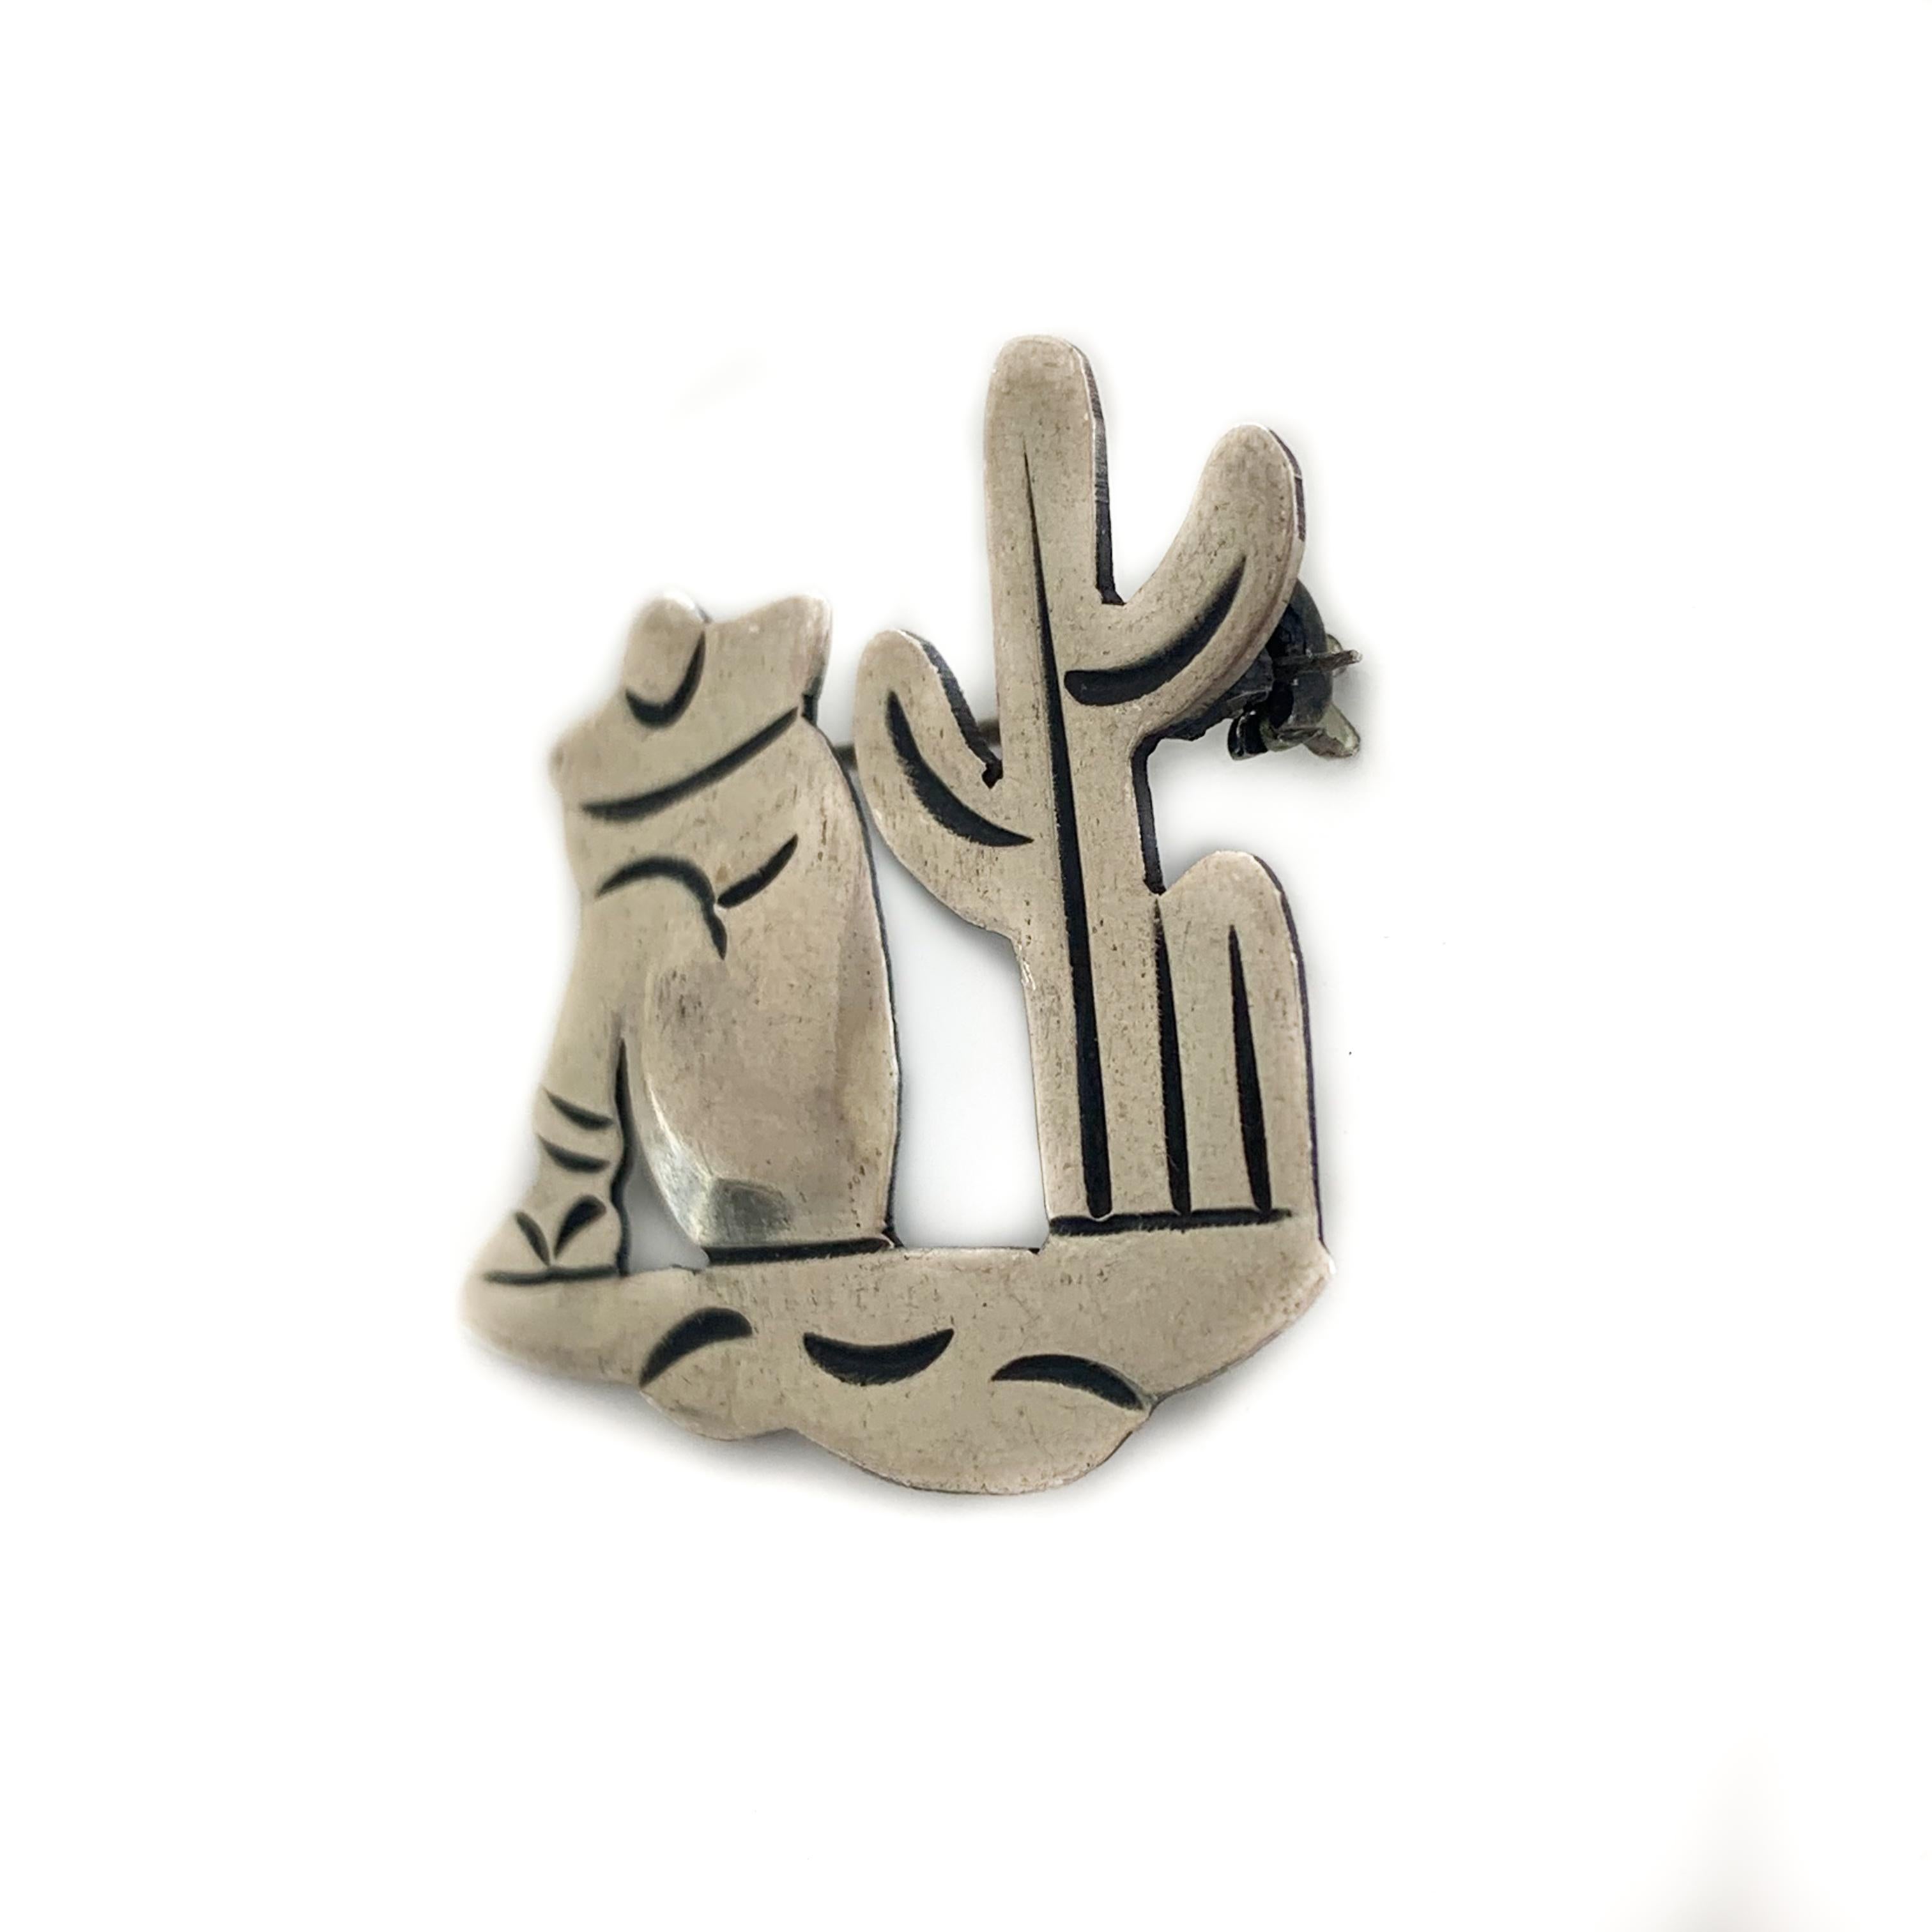 Unique vintage, carved silver, sitting man by cactus, Navajo style brooch